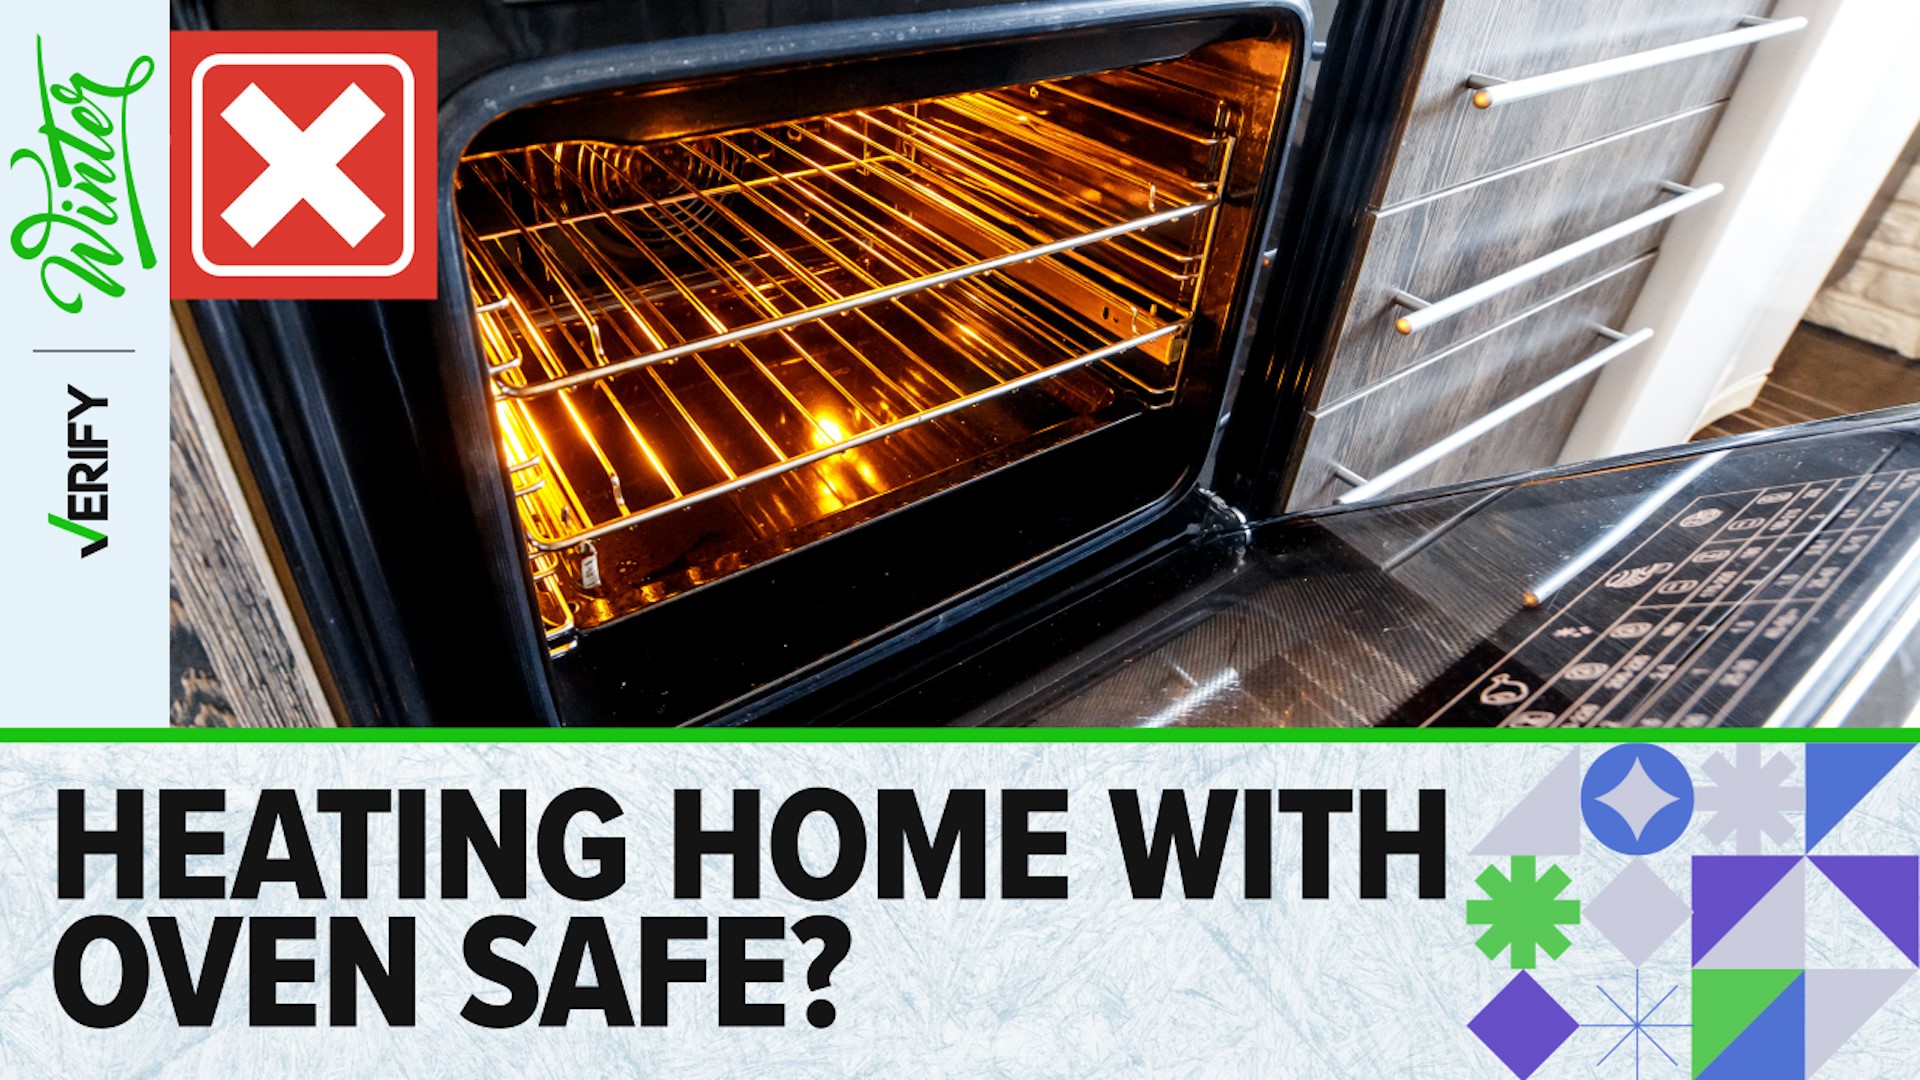 Ovens aren’t designed to heat your home. They also pose risks of fire and carbon monoxide poisoning if they are left on for prolonged periods of time.